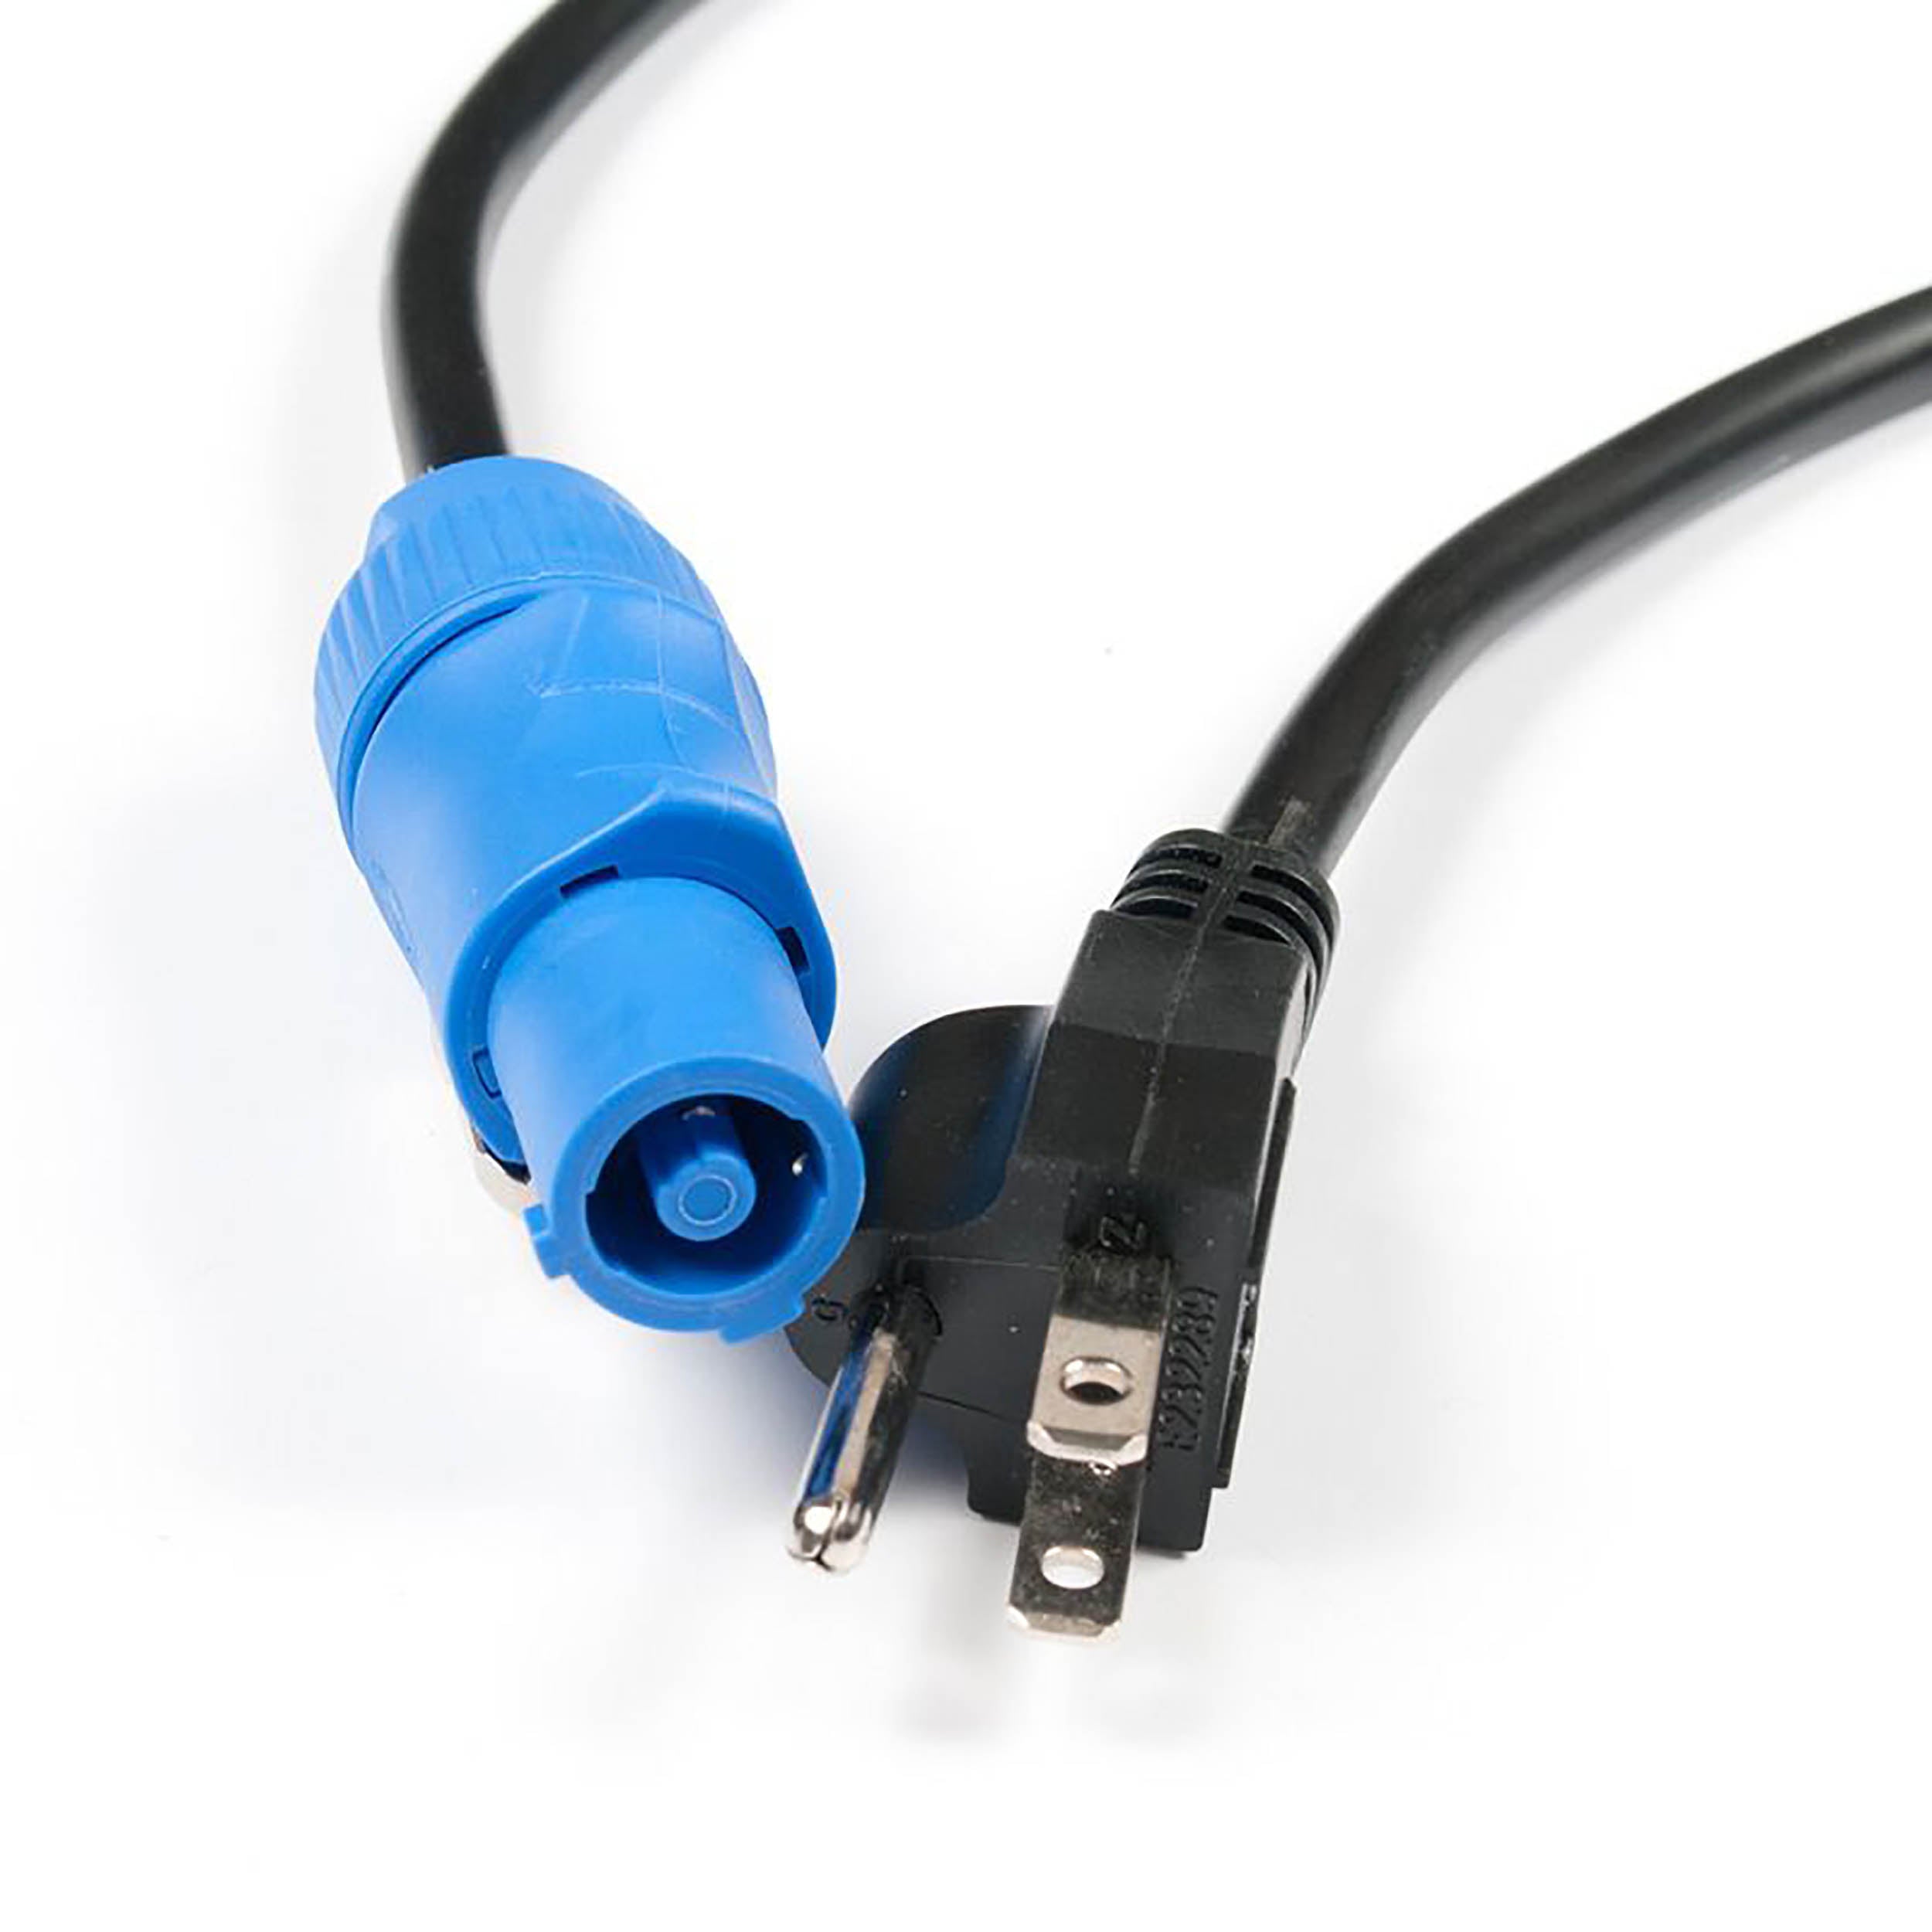 Accu-Cable MPC0, Locking Power Connector to Edison Main Power Cable by Accu Cable